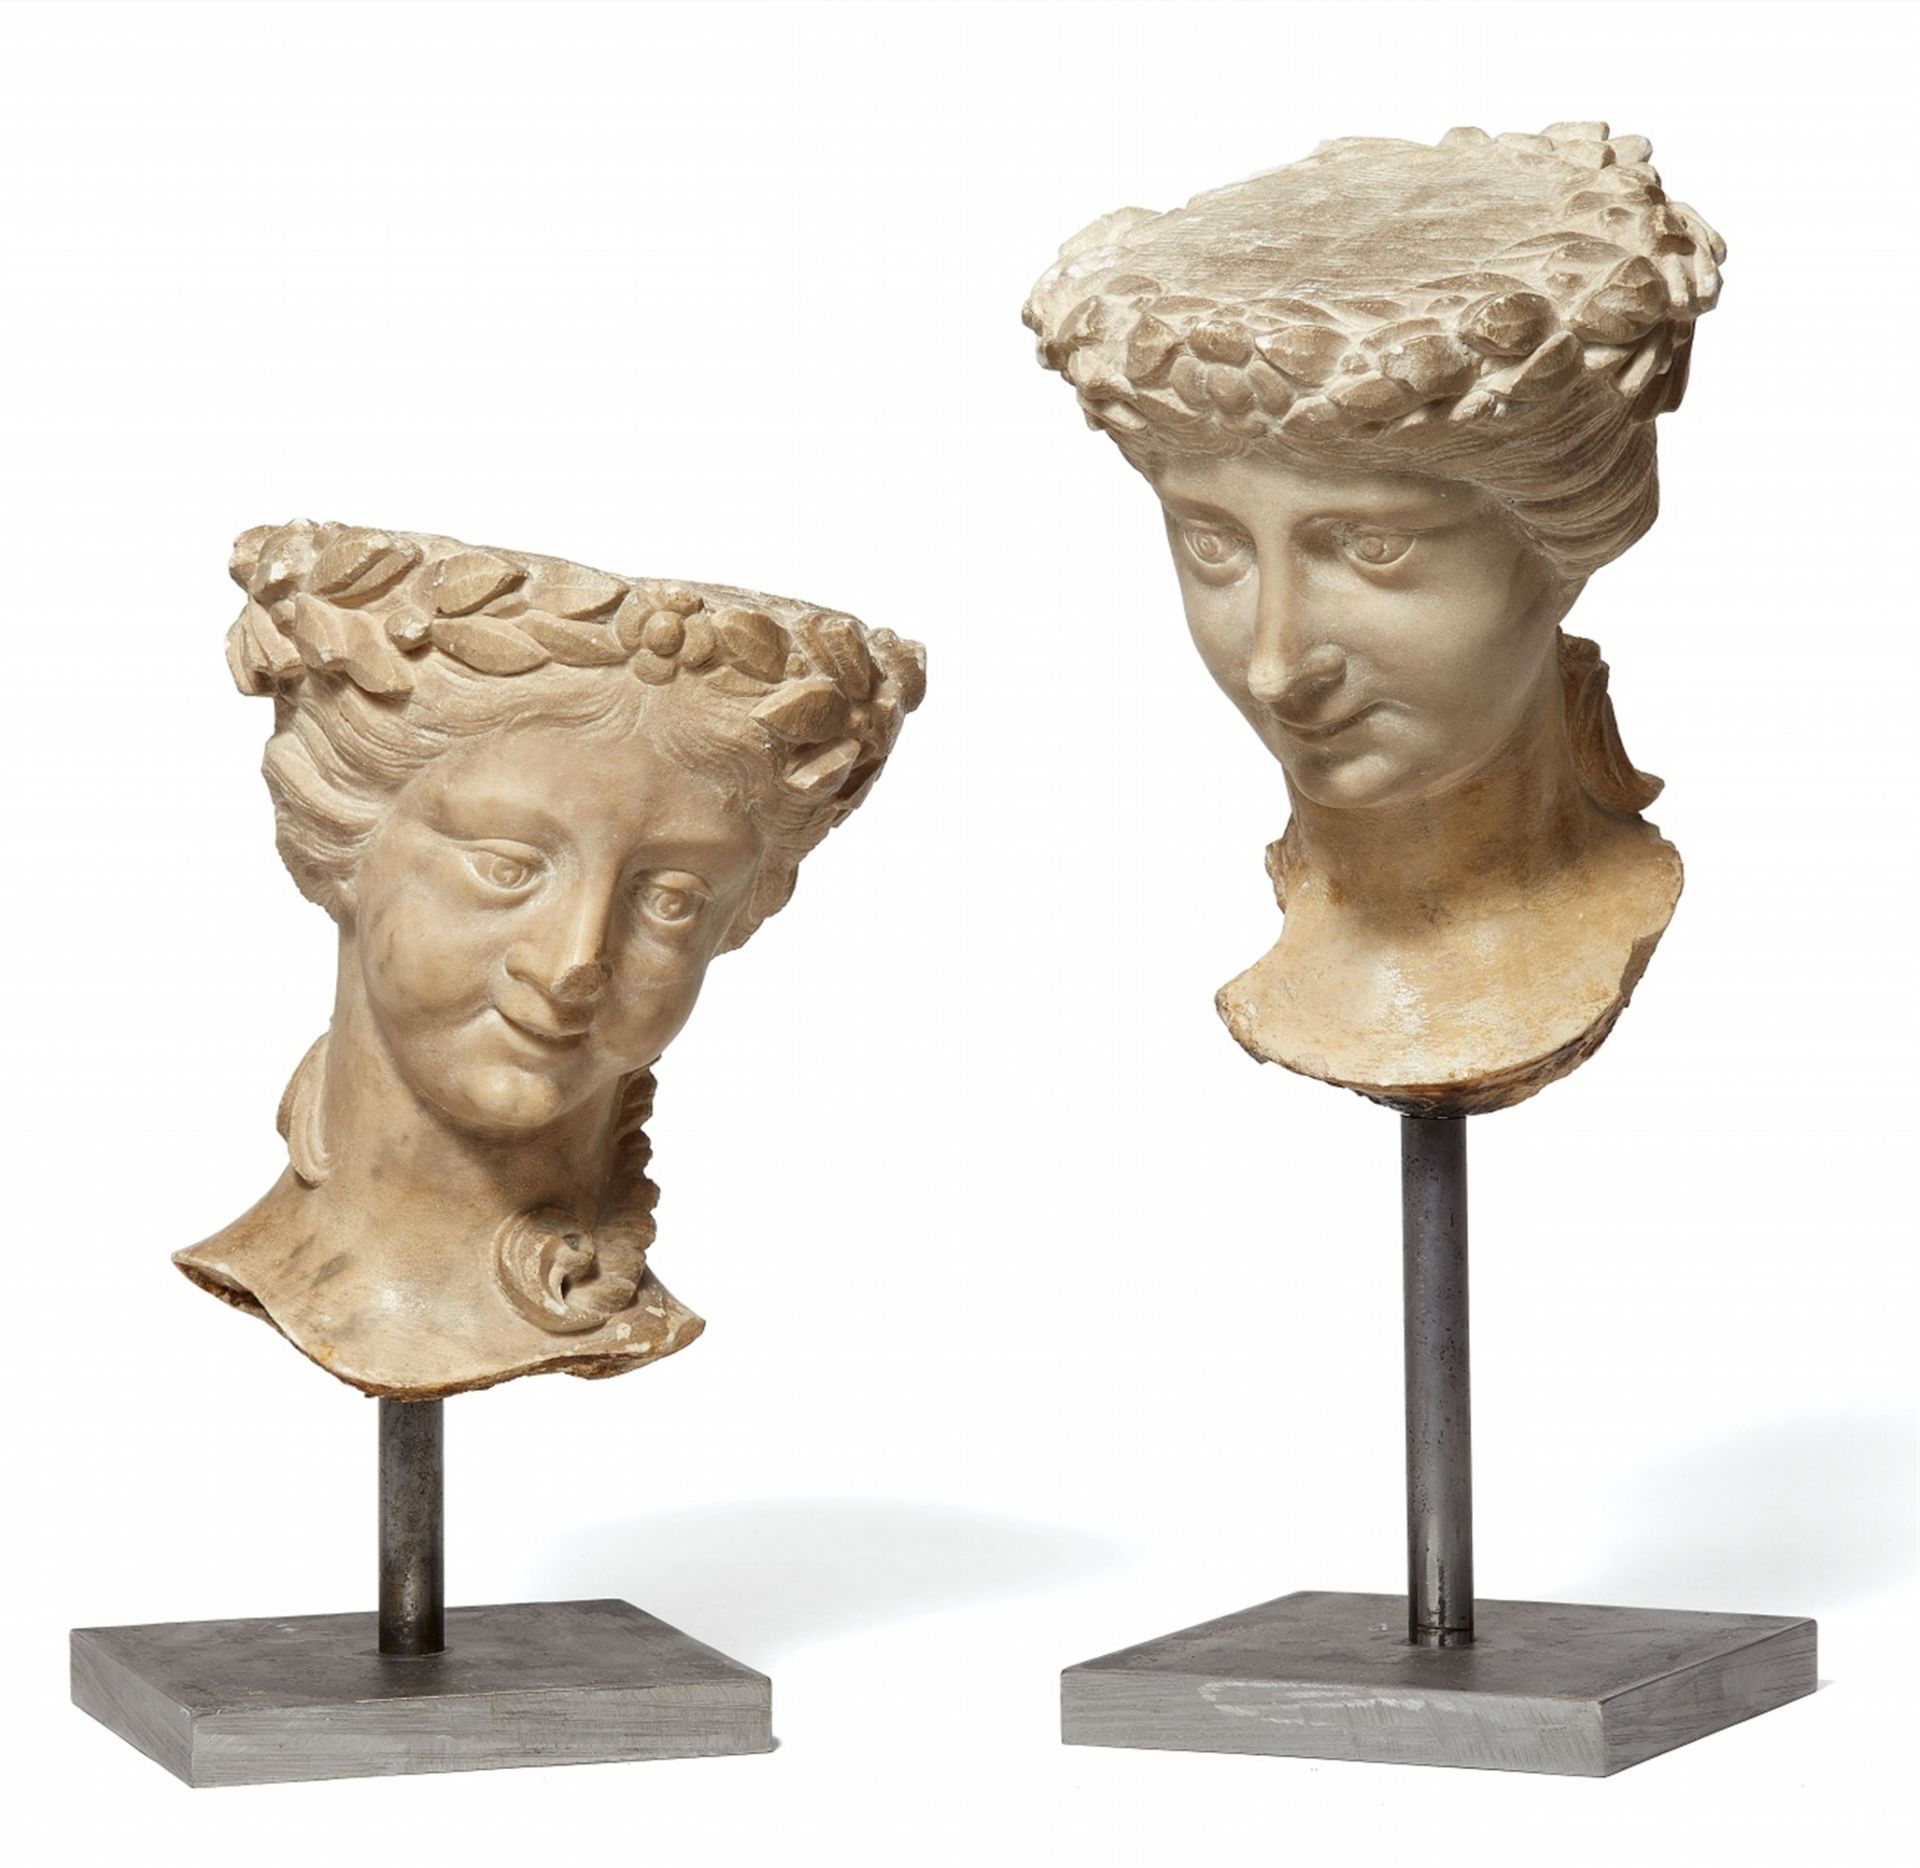 Two female heads carved from limestone